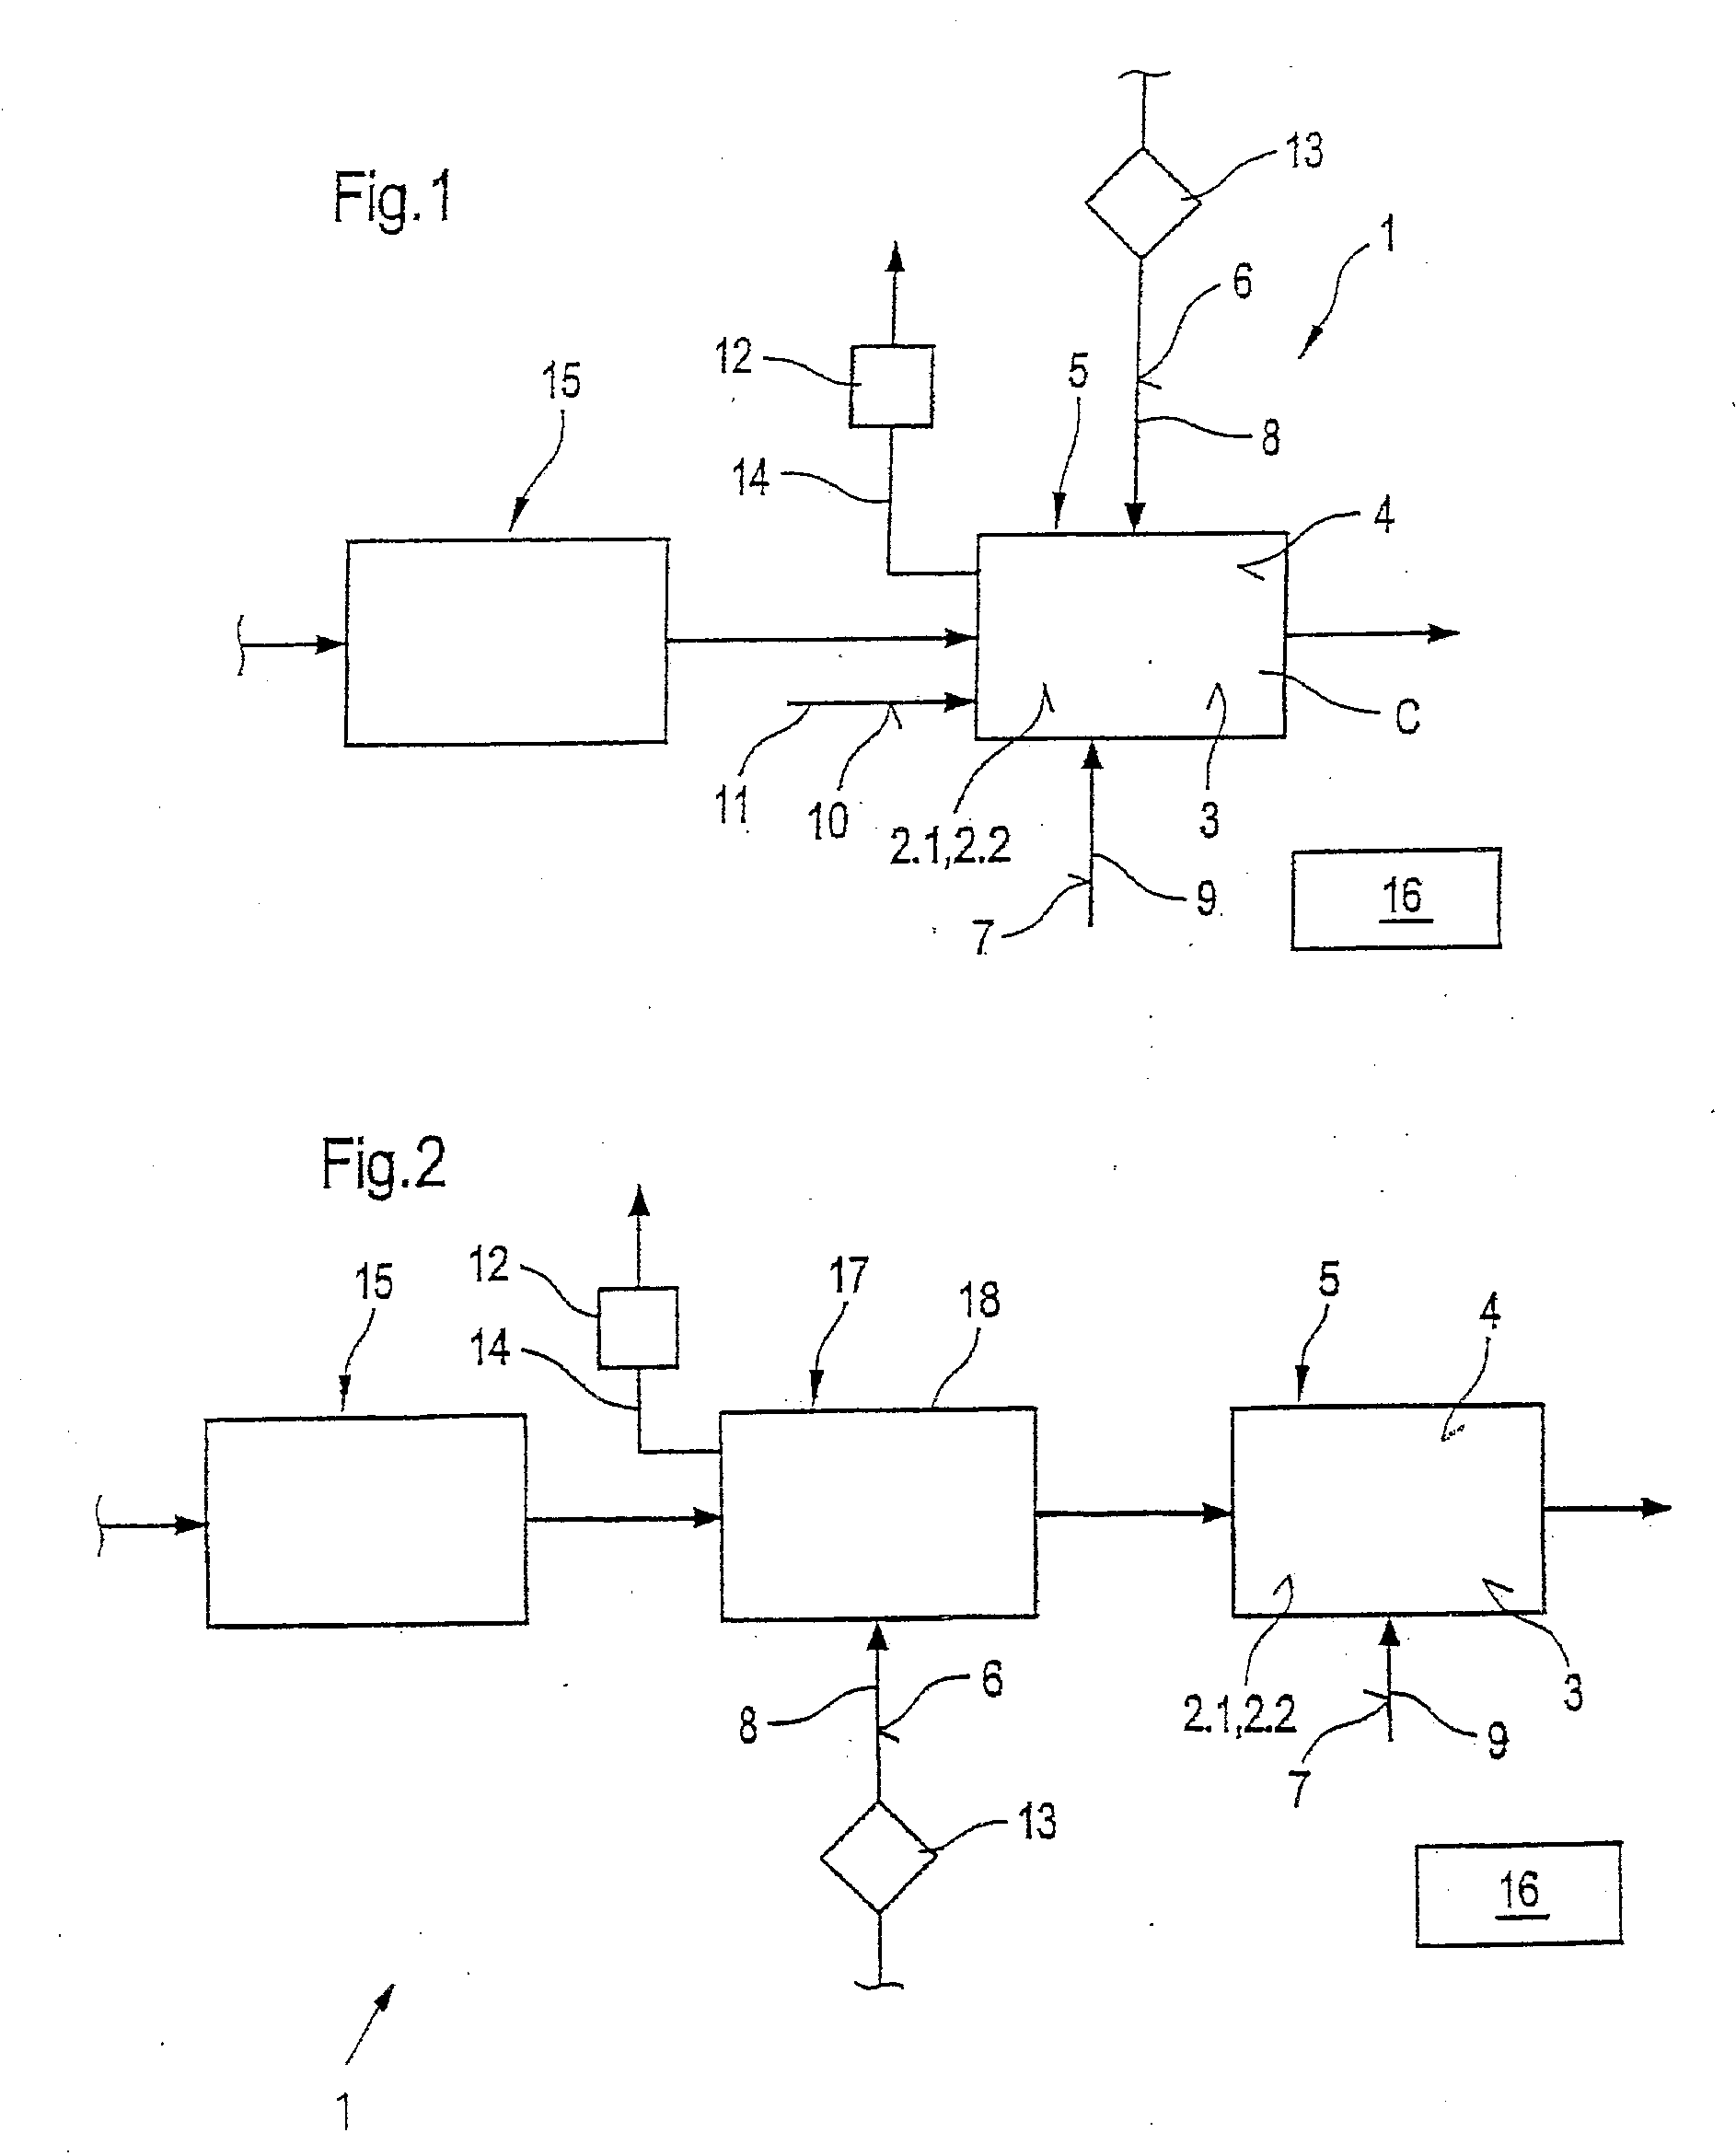 Method and apparatus for loading fibers or cellulose which are contained in a suspension with a filler